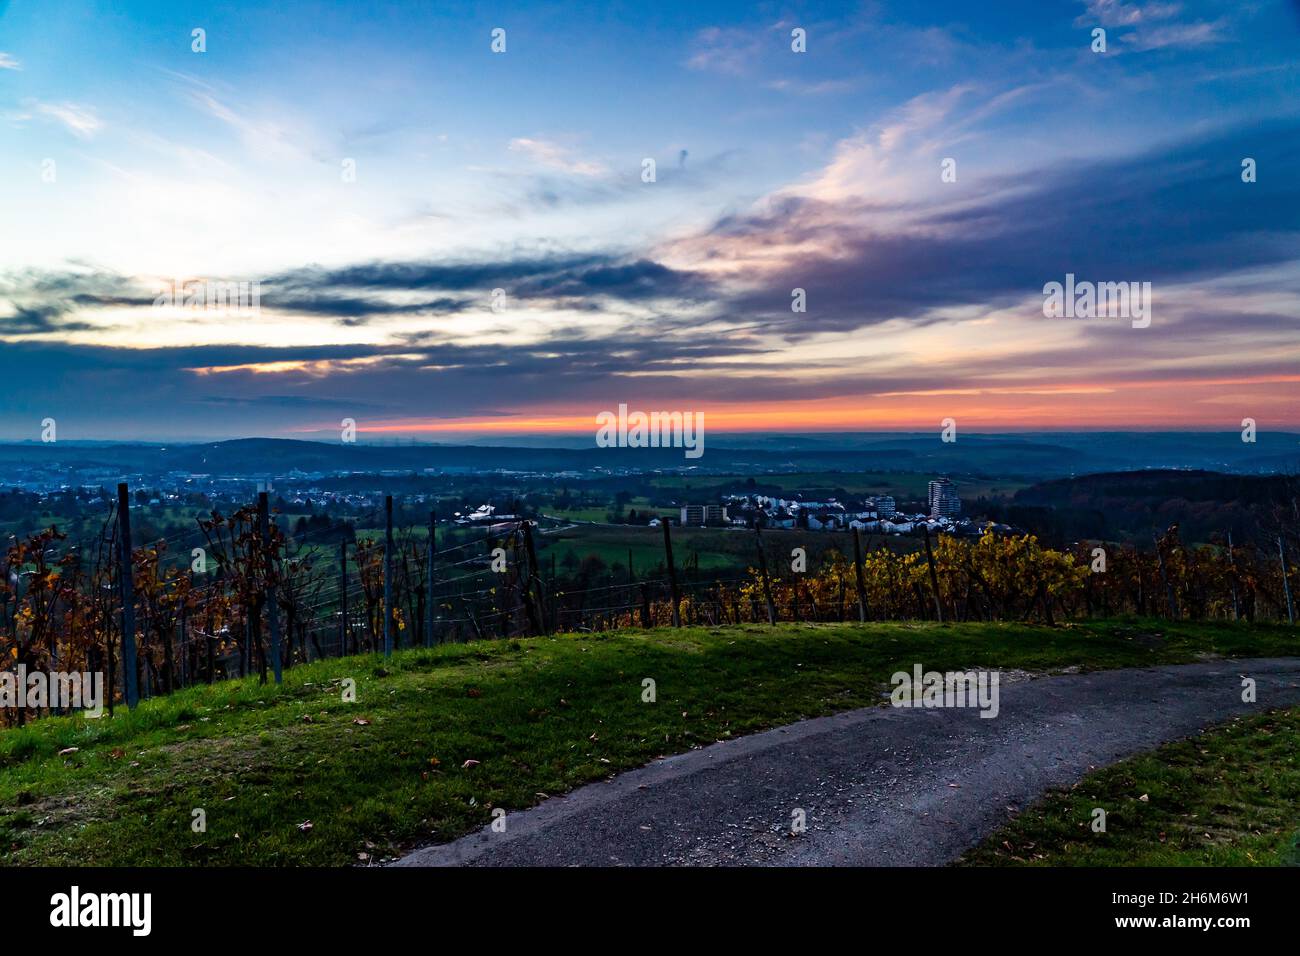 View over the Grafenberg vineyard towards the city of Metzingen as the sun sets Stock Photo